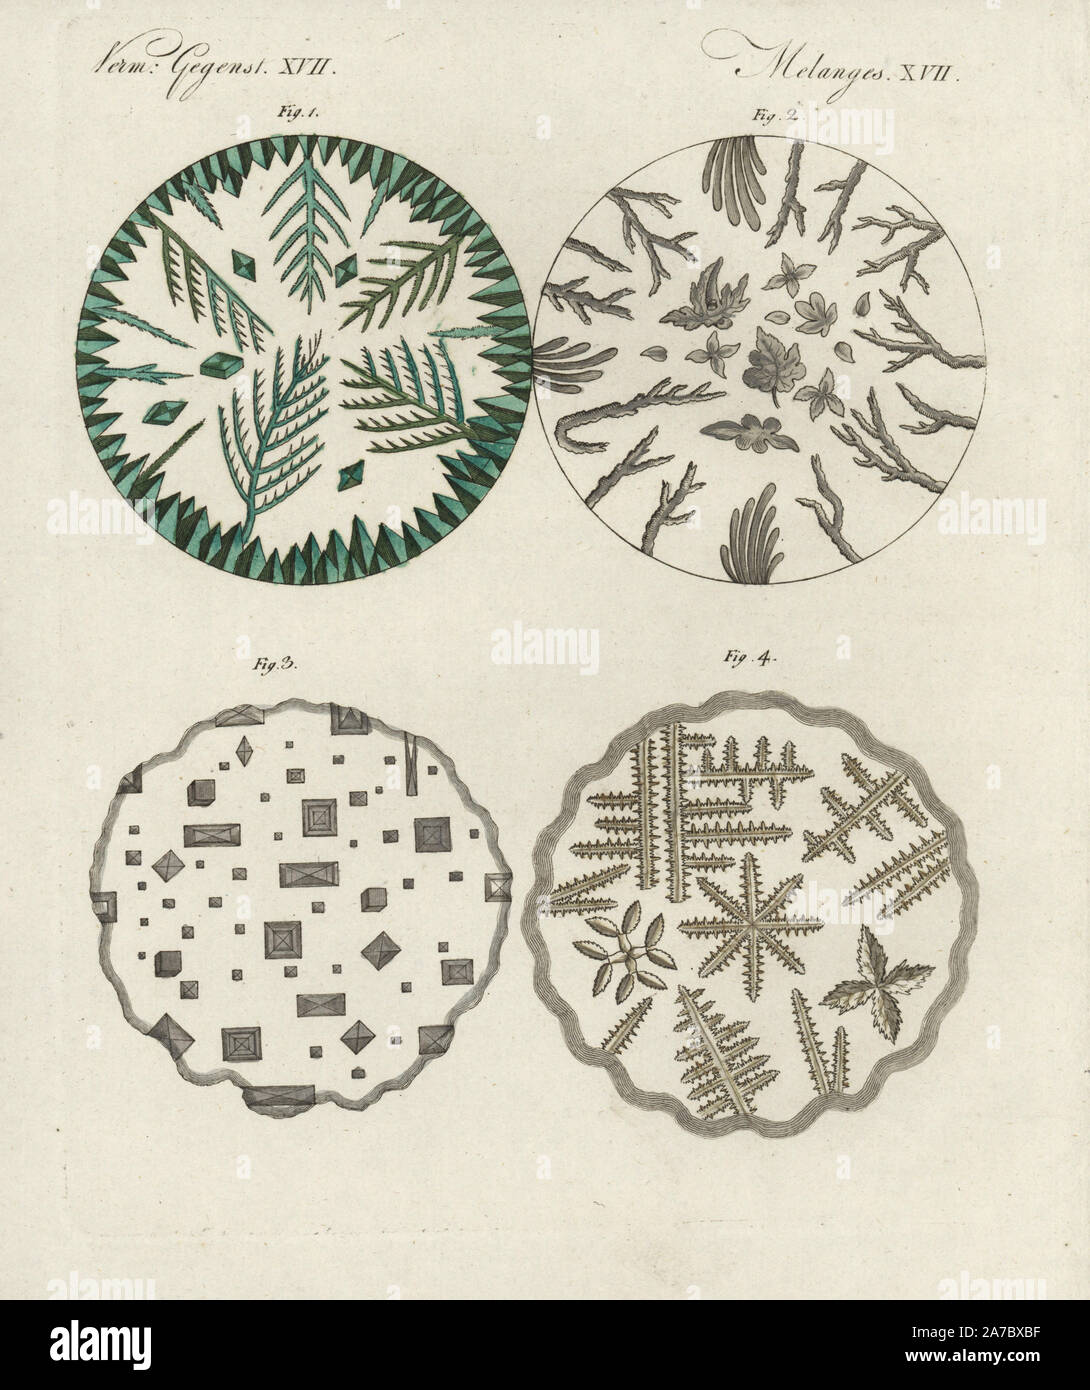 Crystals of verdigris 1, boric acid 2, common salt 3, and sal ammoniac 4 under the microscope. Handcoloured copperplate engraving from Bertuch's 'Bilderbuch fur Kinder' (Picture Book for Children), Weimar, 1798. Friedrich Johann Bertuch (1747-1822) was a German publisher and man of arts most famous for his 12-volume encyclopedia for children illustrated with 1,200 engraved plates on natural history, science, costume, mythology, etc., published from 1790-1830. Stock Photo